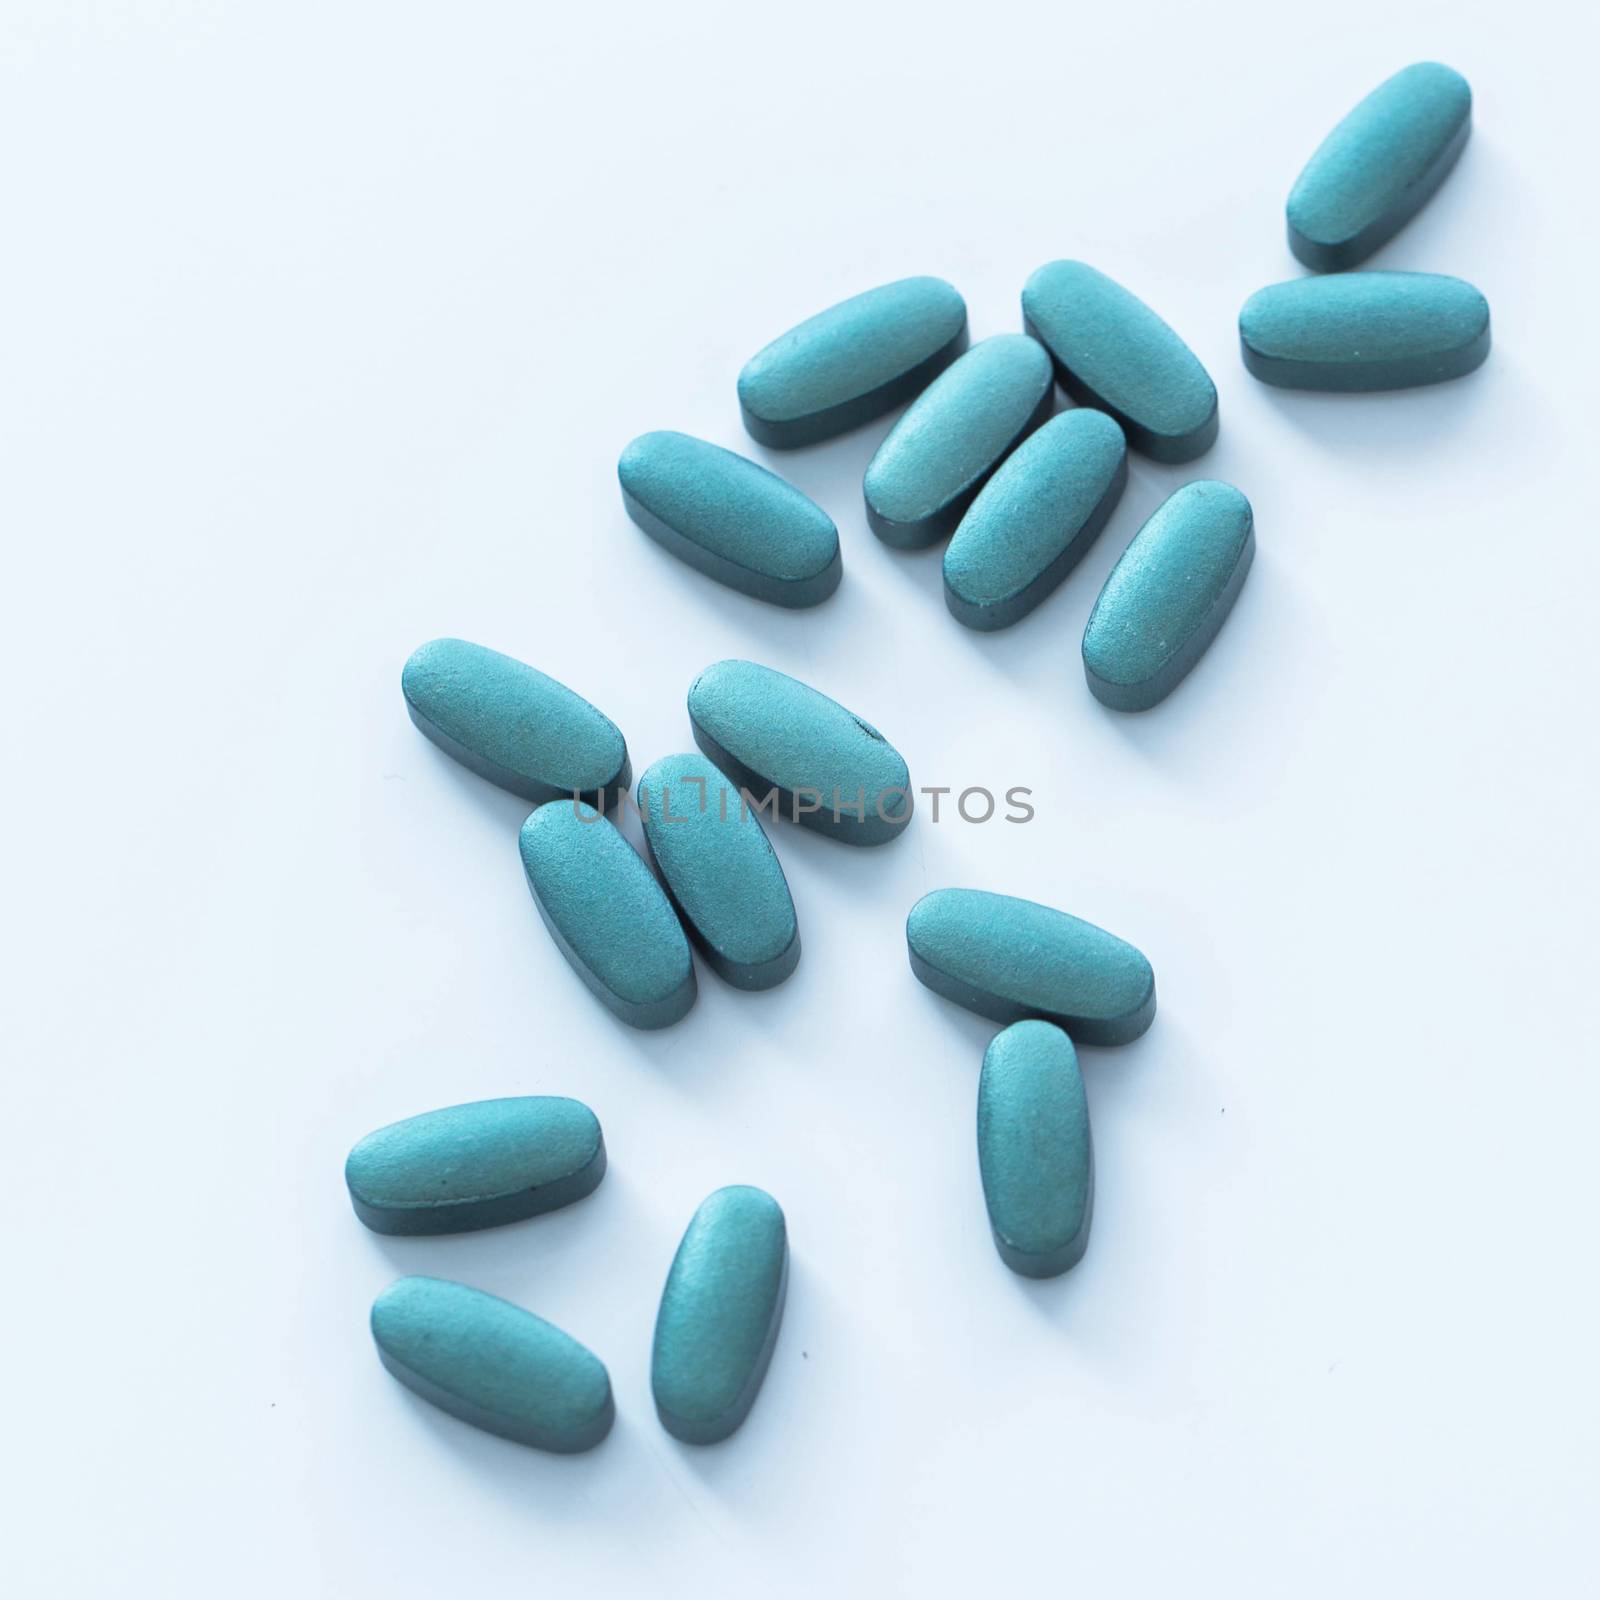 Closeup picture of blue pills over a white background